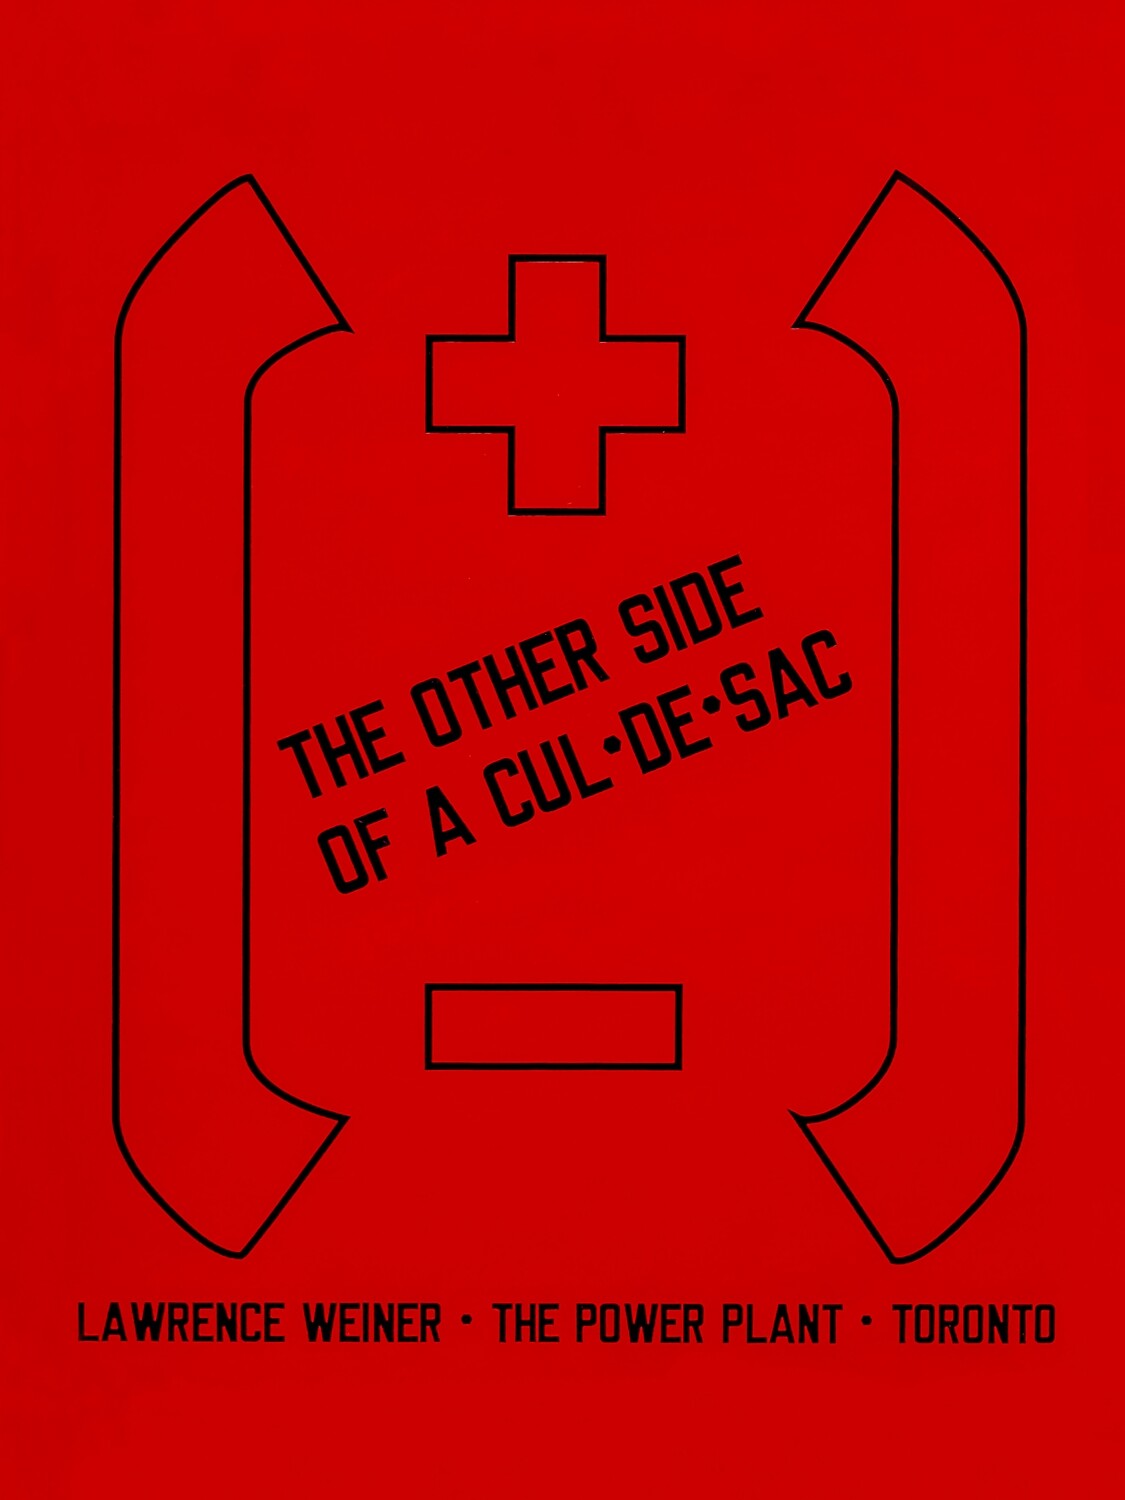 Lawrence Weiner: The Other Side of a Cul-de-sac